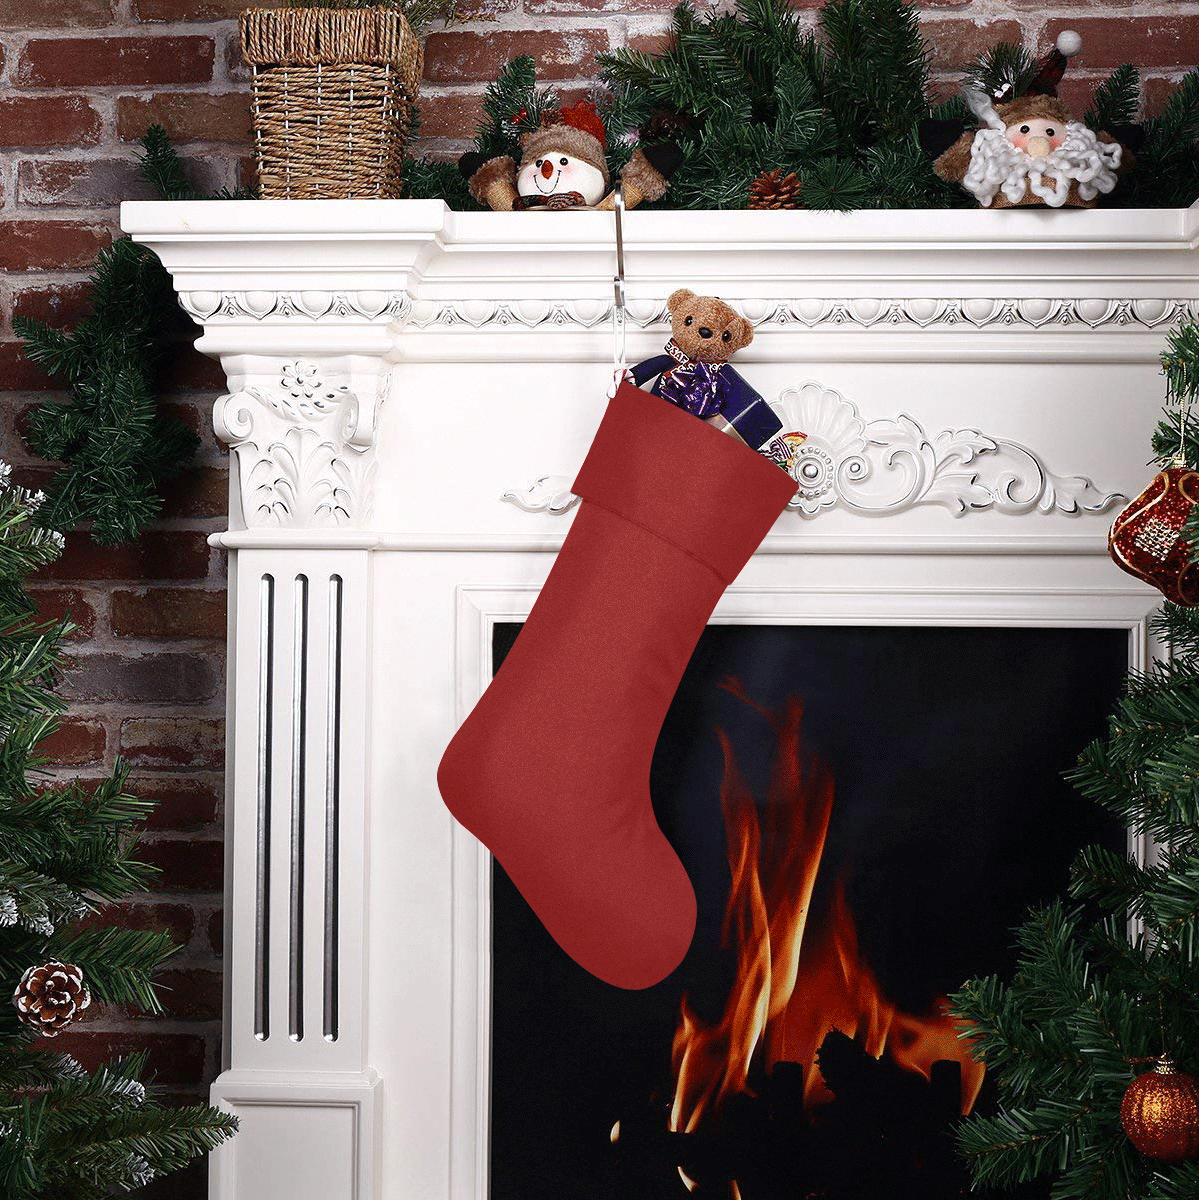 color maroon Christmas Stocking